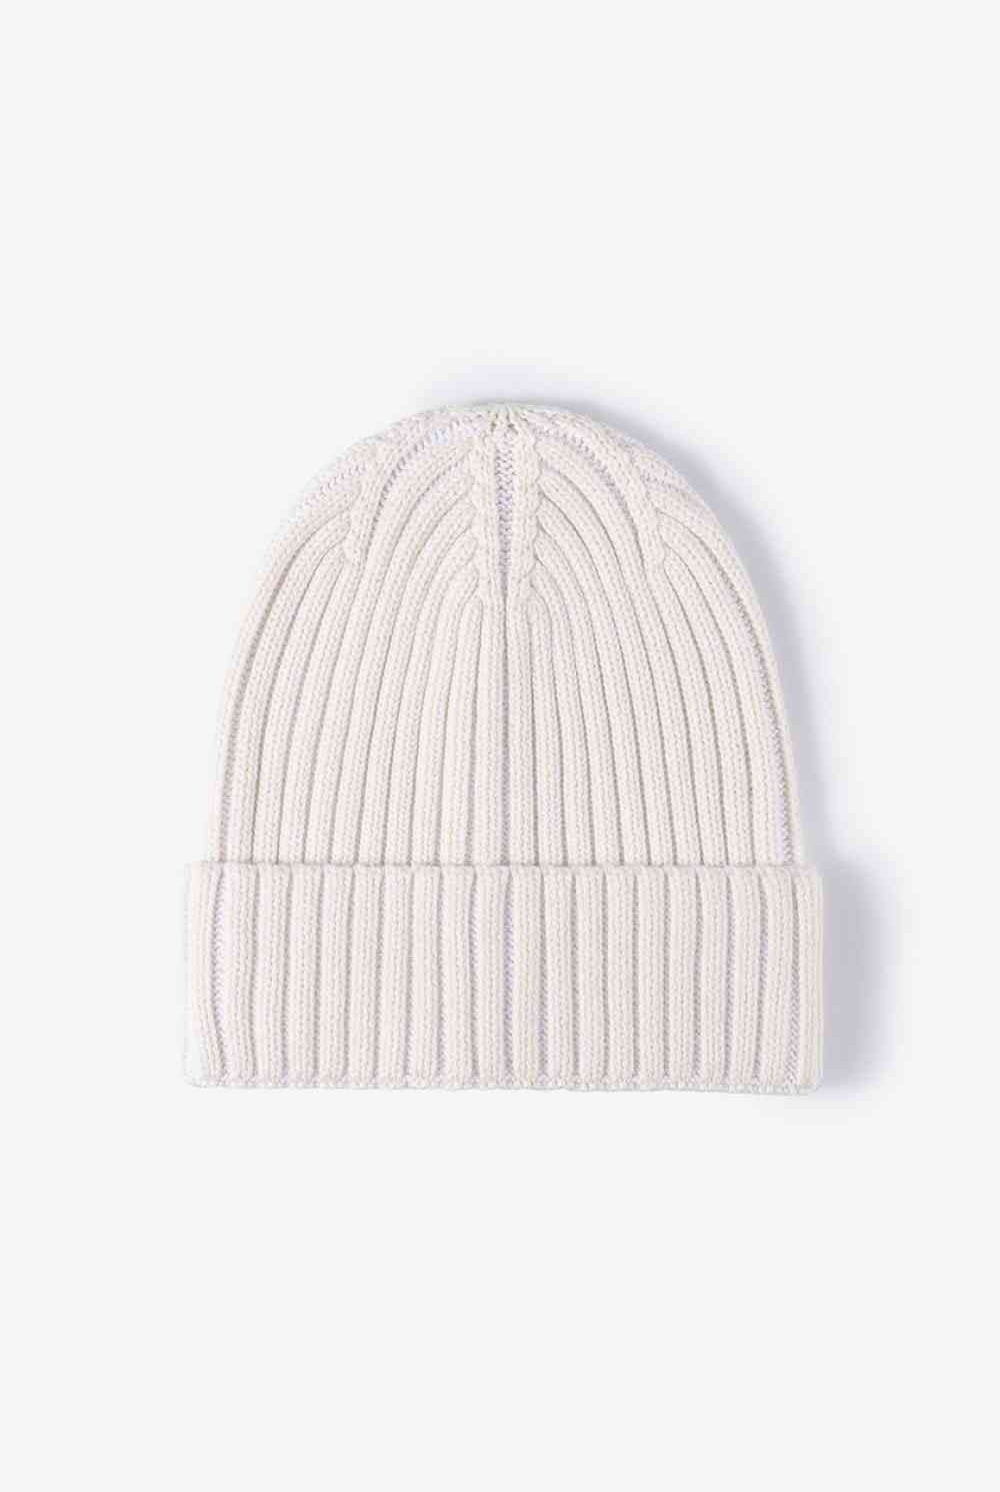 White Smoke Soft and Comfortable Cuffed Beanie Winter Accessories